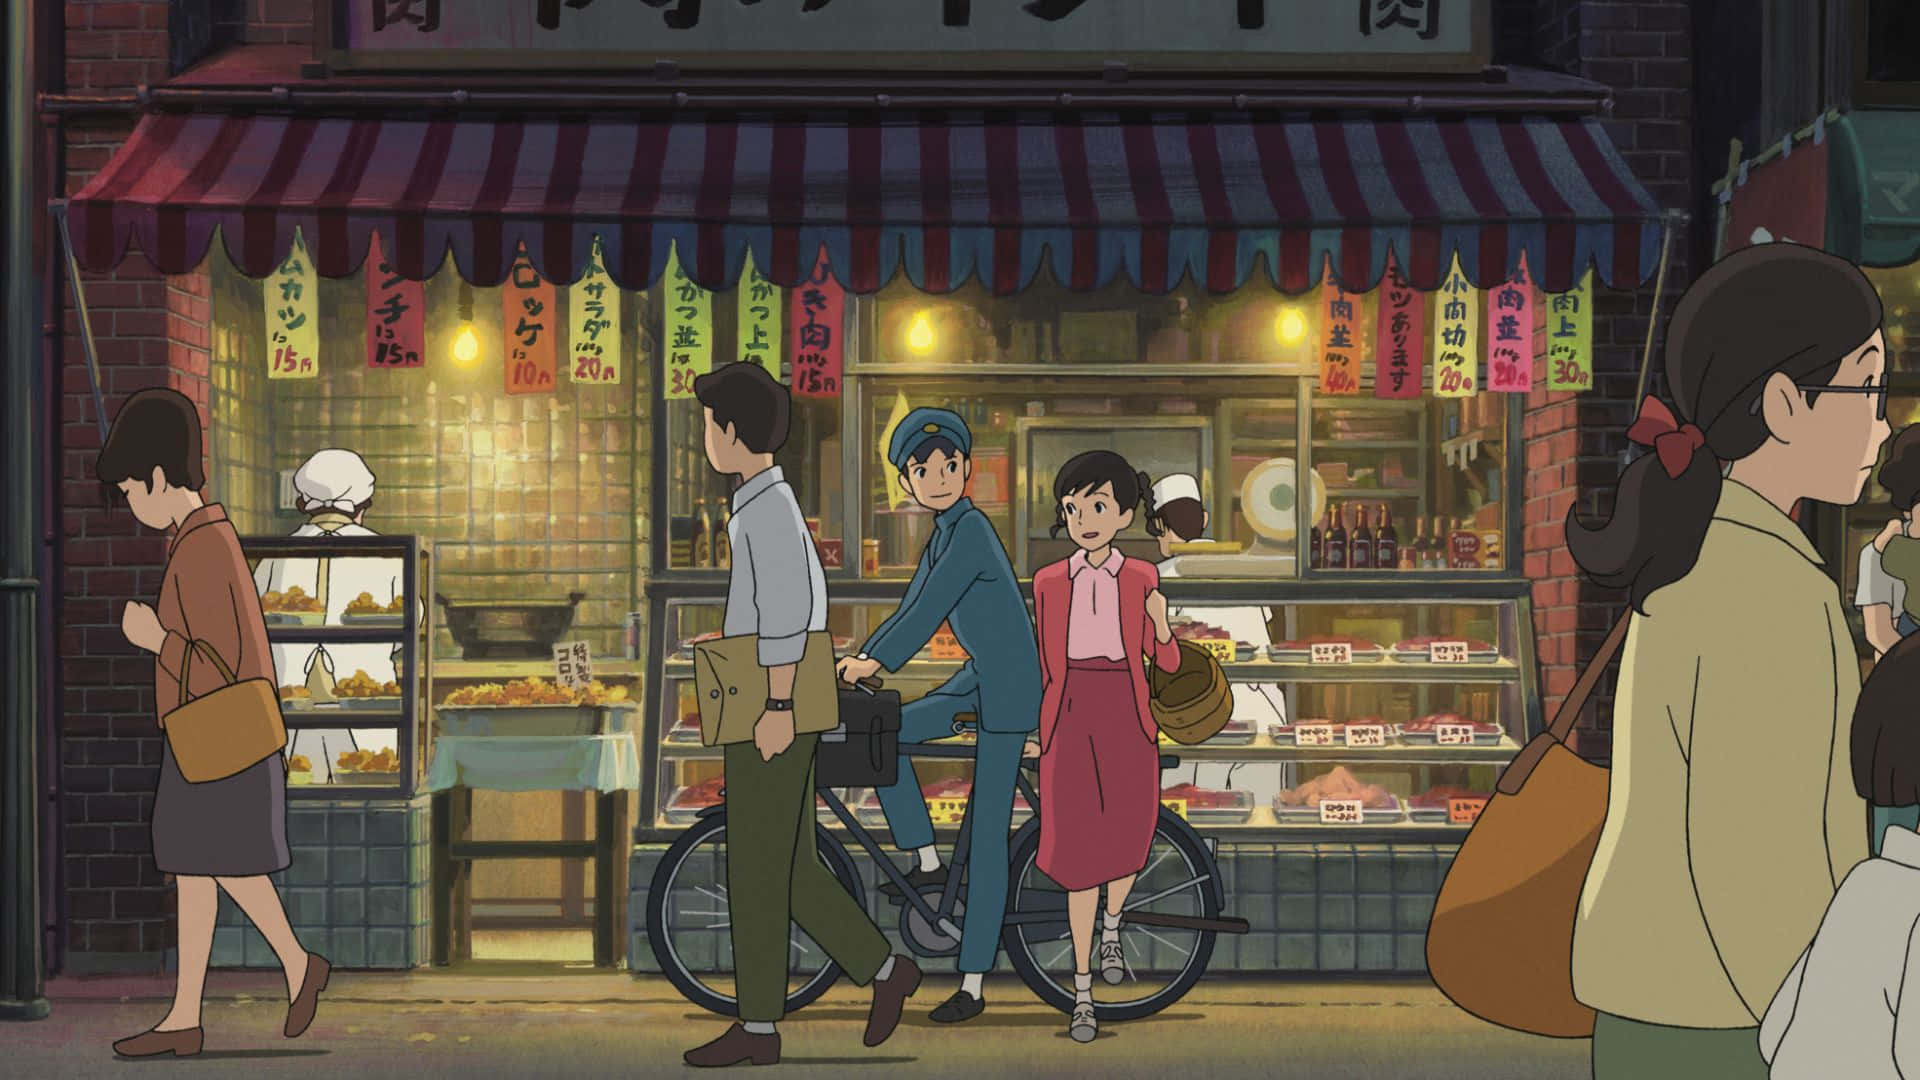 From Up On Poppy Hill is a beautiful story of friendship and perseverance.